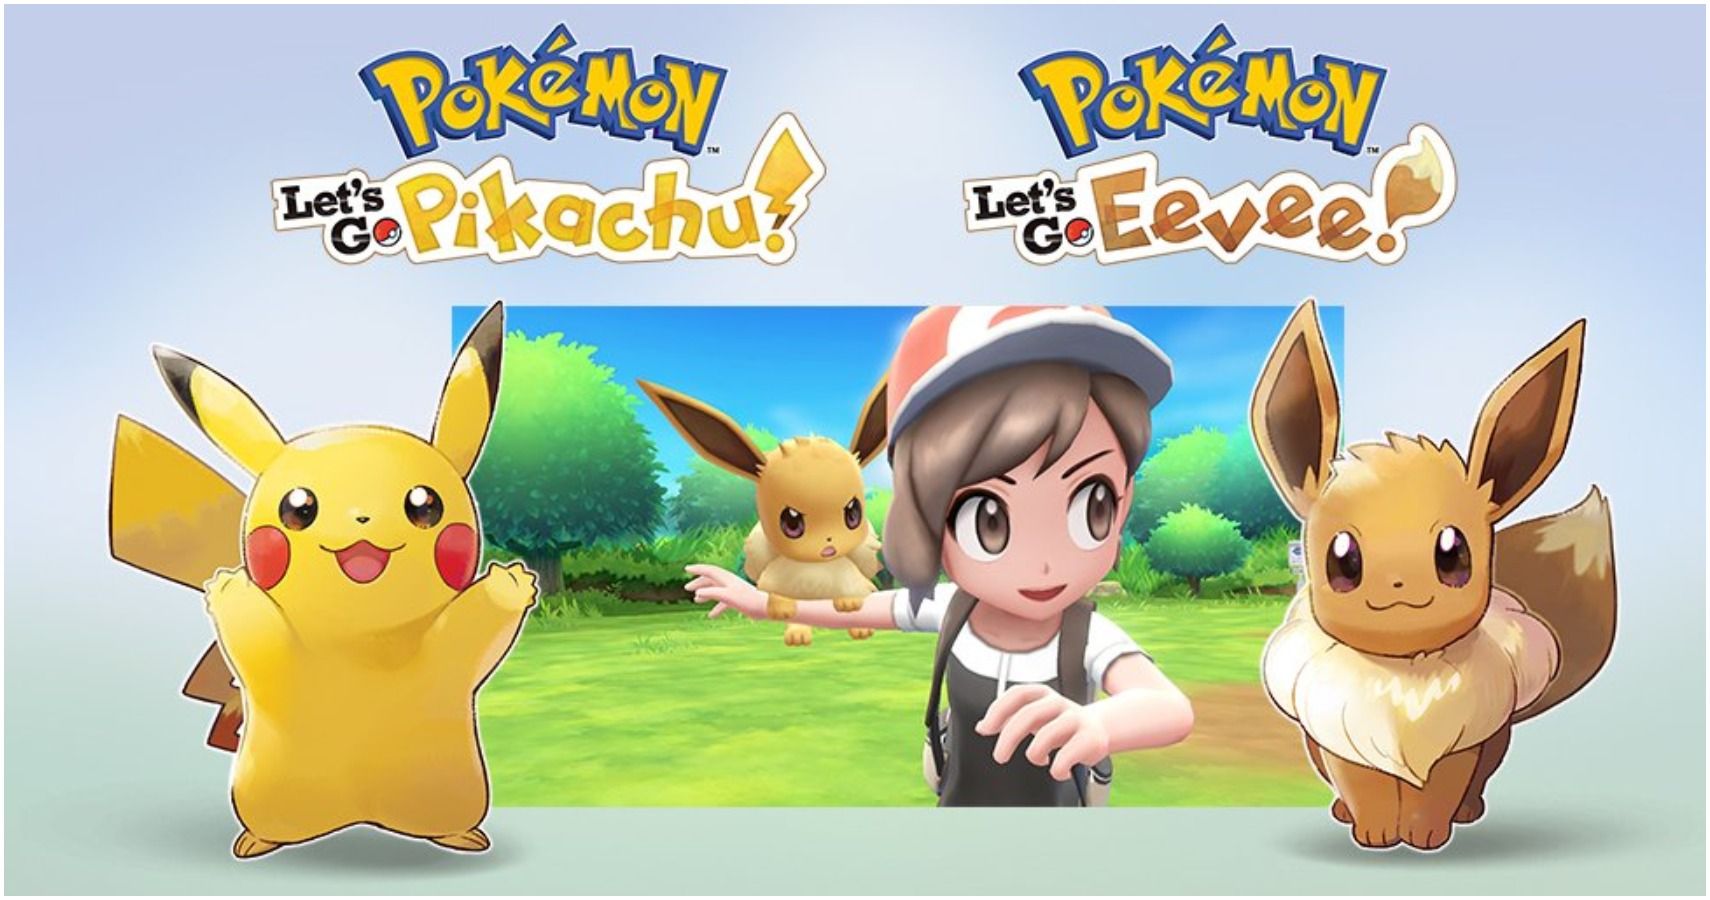 Pokémon Lets Go Pikachu And Eevee Will Require Paid Online